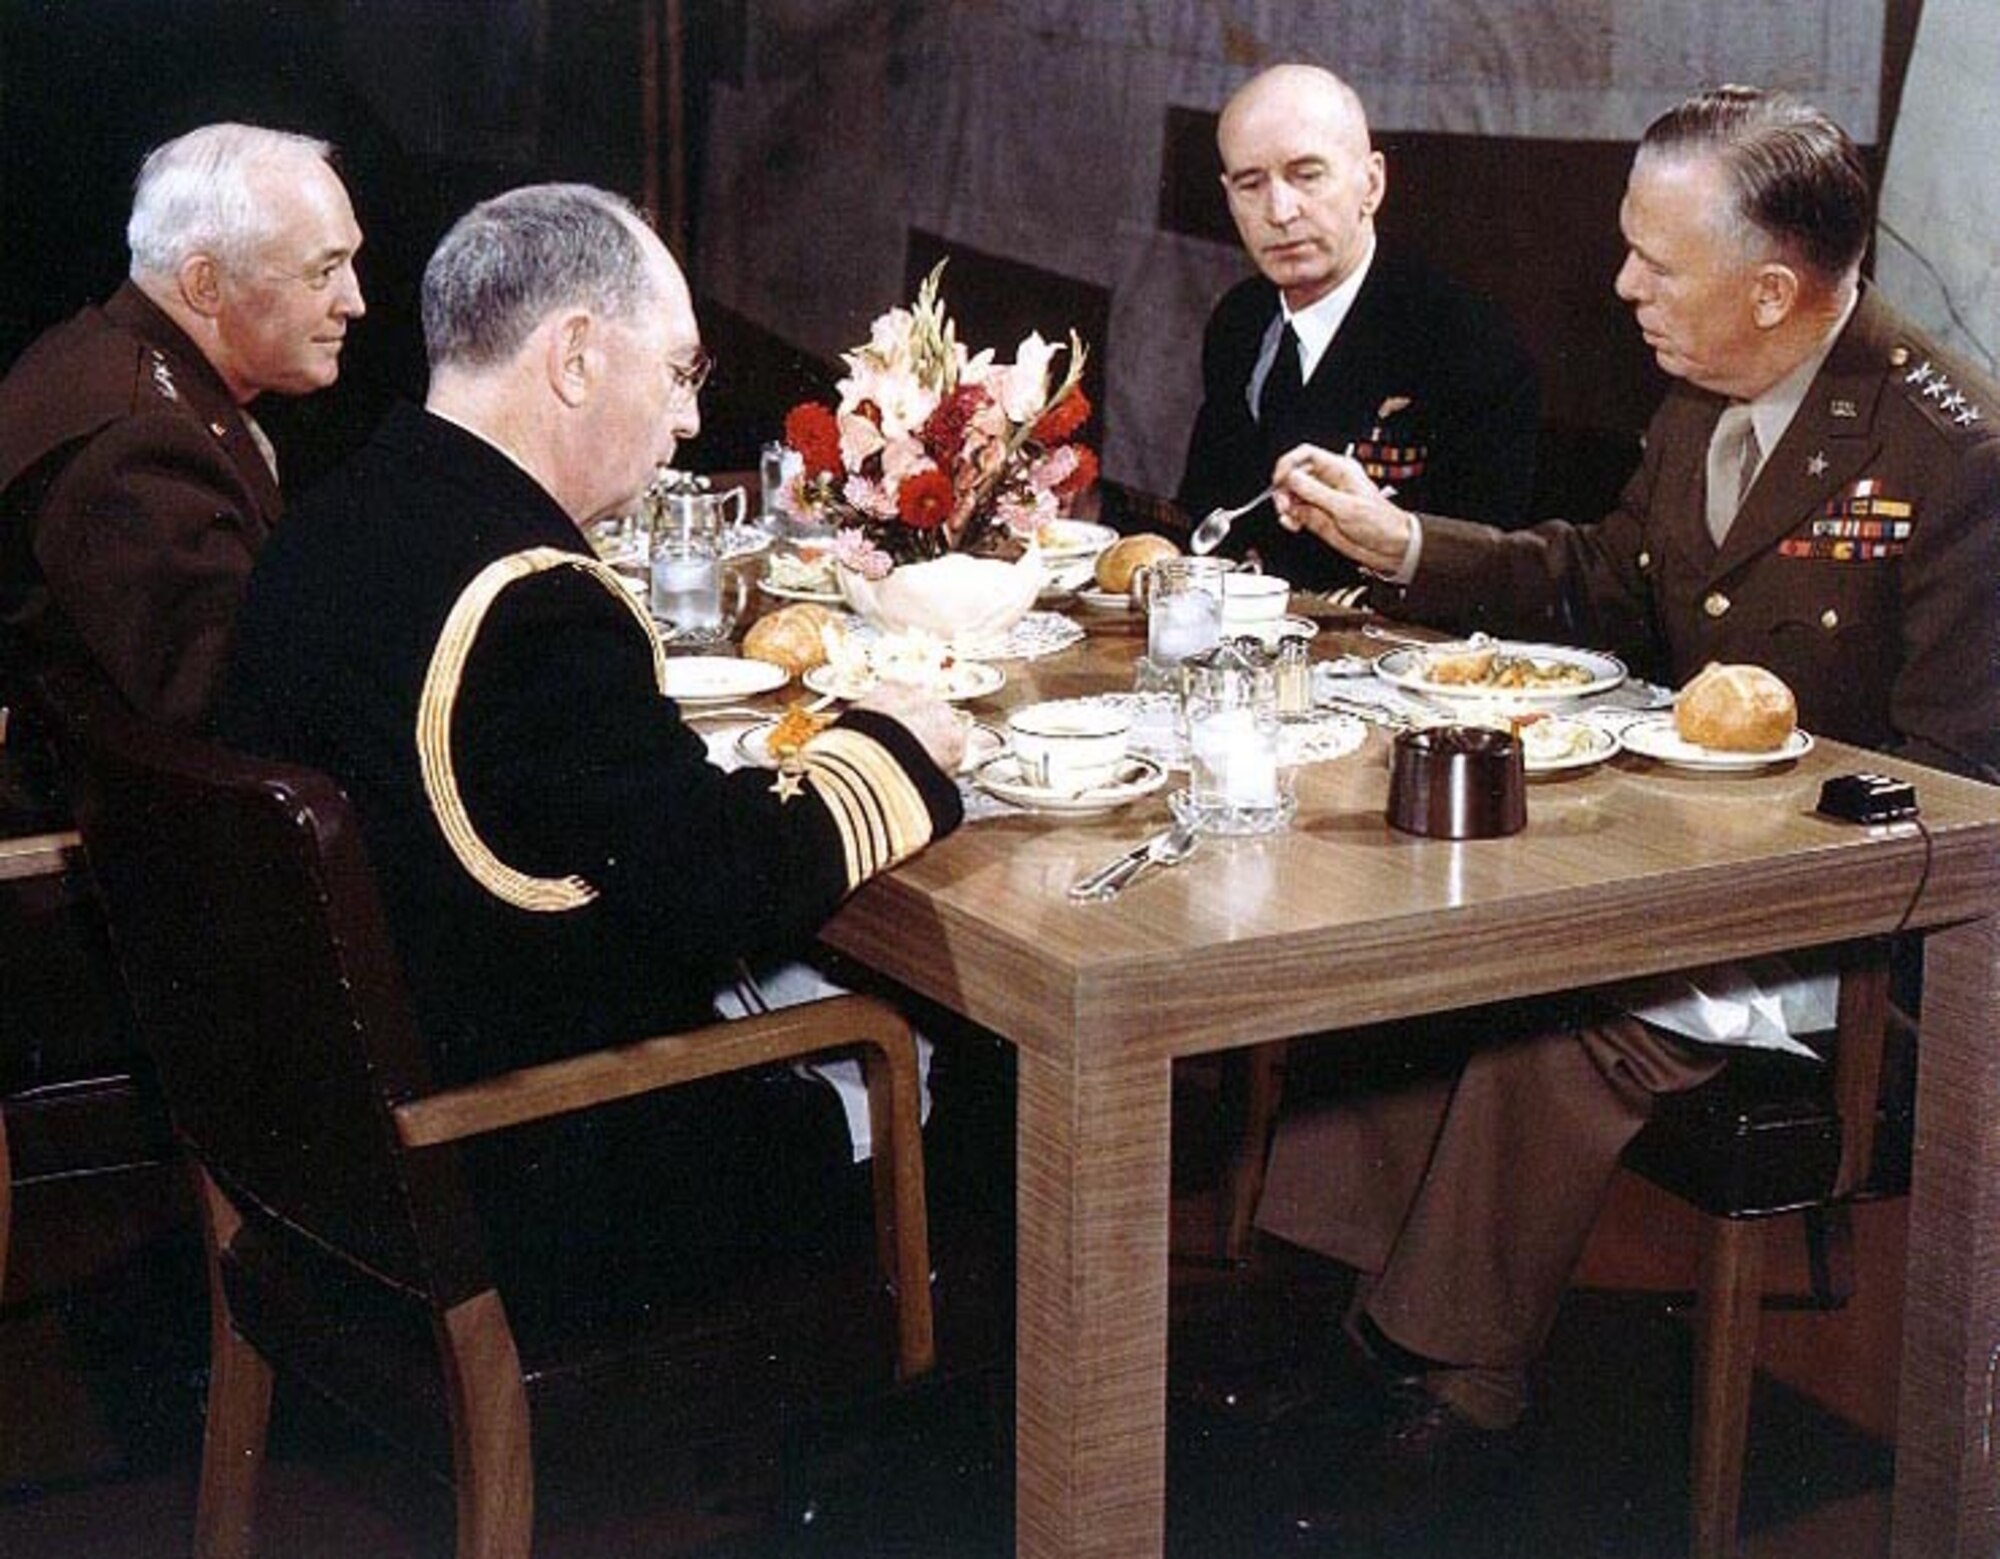 Joint Chiefs of Staff at a luncheon meeting (circa 1943). Counterclockwise: Adm. William D. Leahy, chief of staff to the commander in chief of the Army and Navy; Gen. George C. Marshall, chief of staff of the U.S. Army; Adm. Ernest J. King, commander in chief, U.S. Fleet and chief of naval operations; and Gen. Henry H. Arnold, chief of the Army Air Forces.